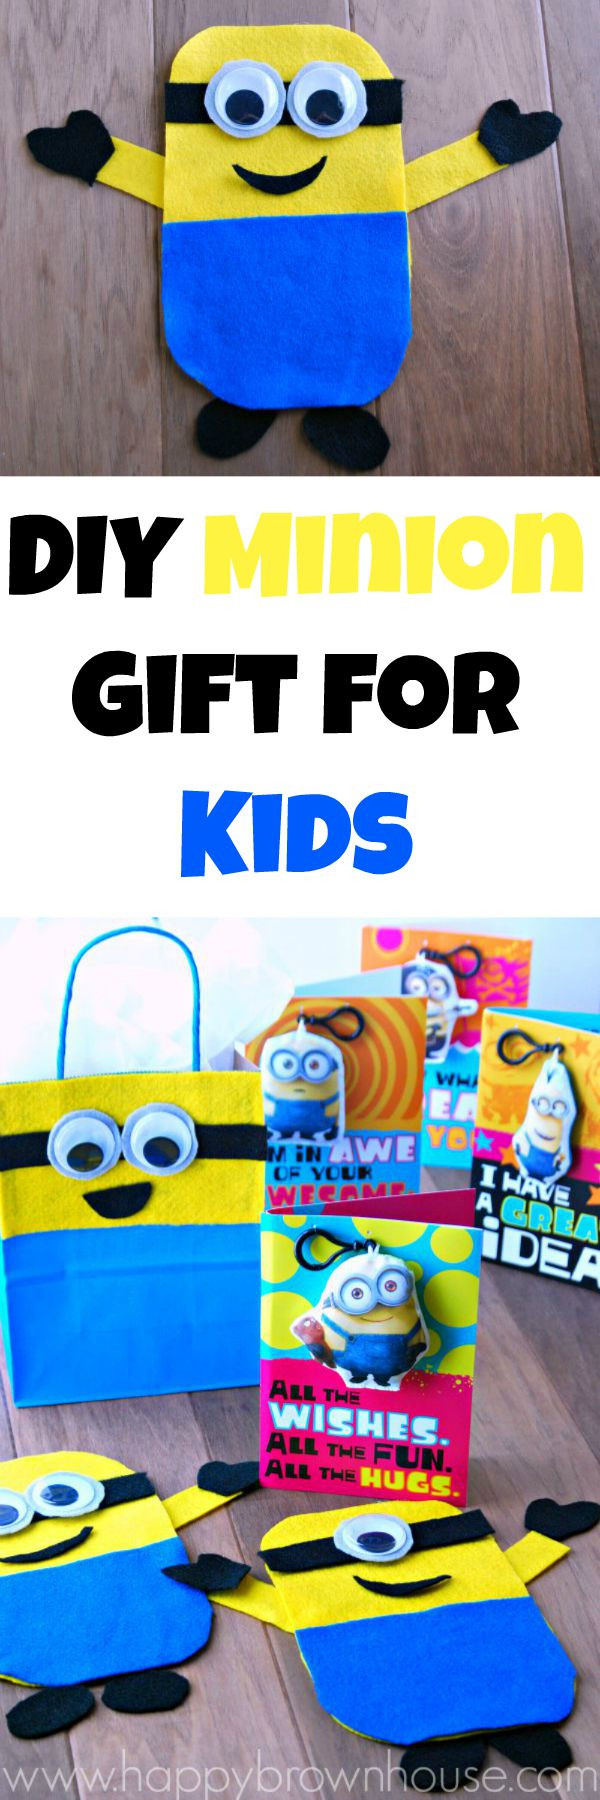 Minions Gifts For Kids
 Build a Minion Busy Bag